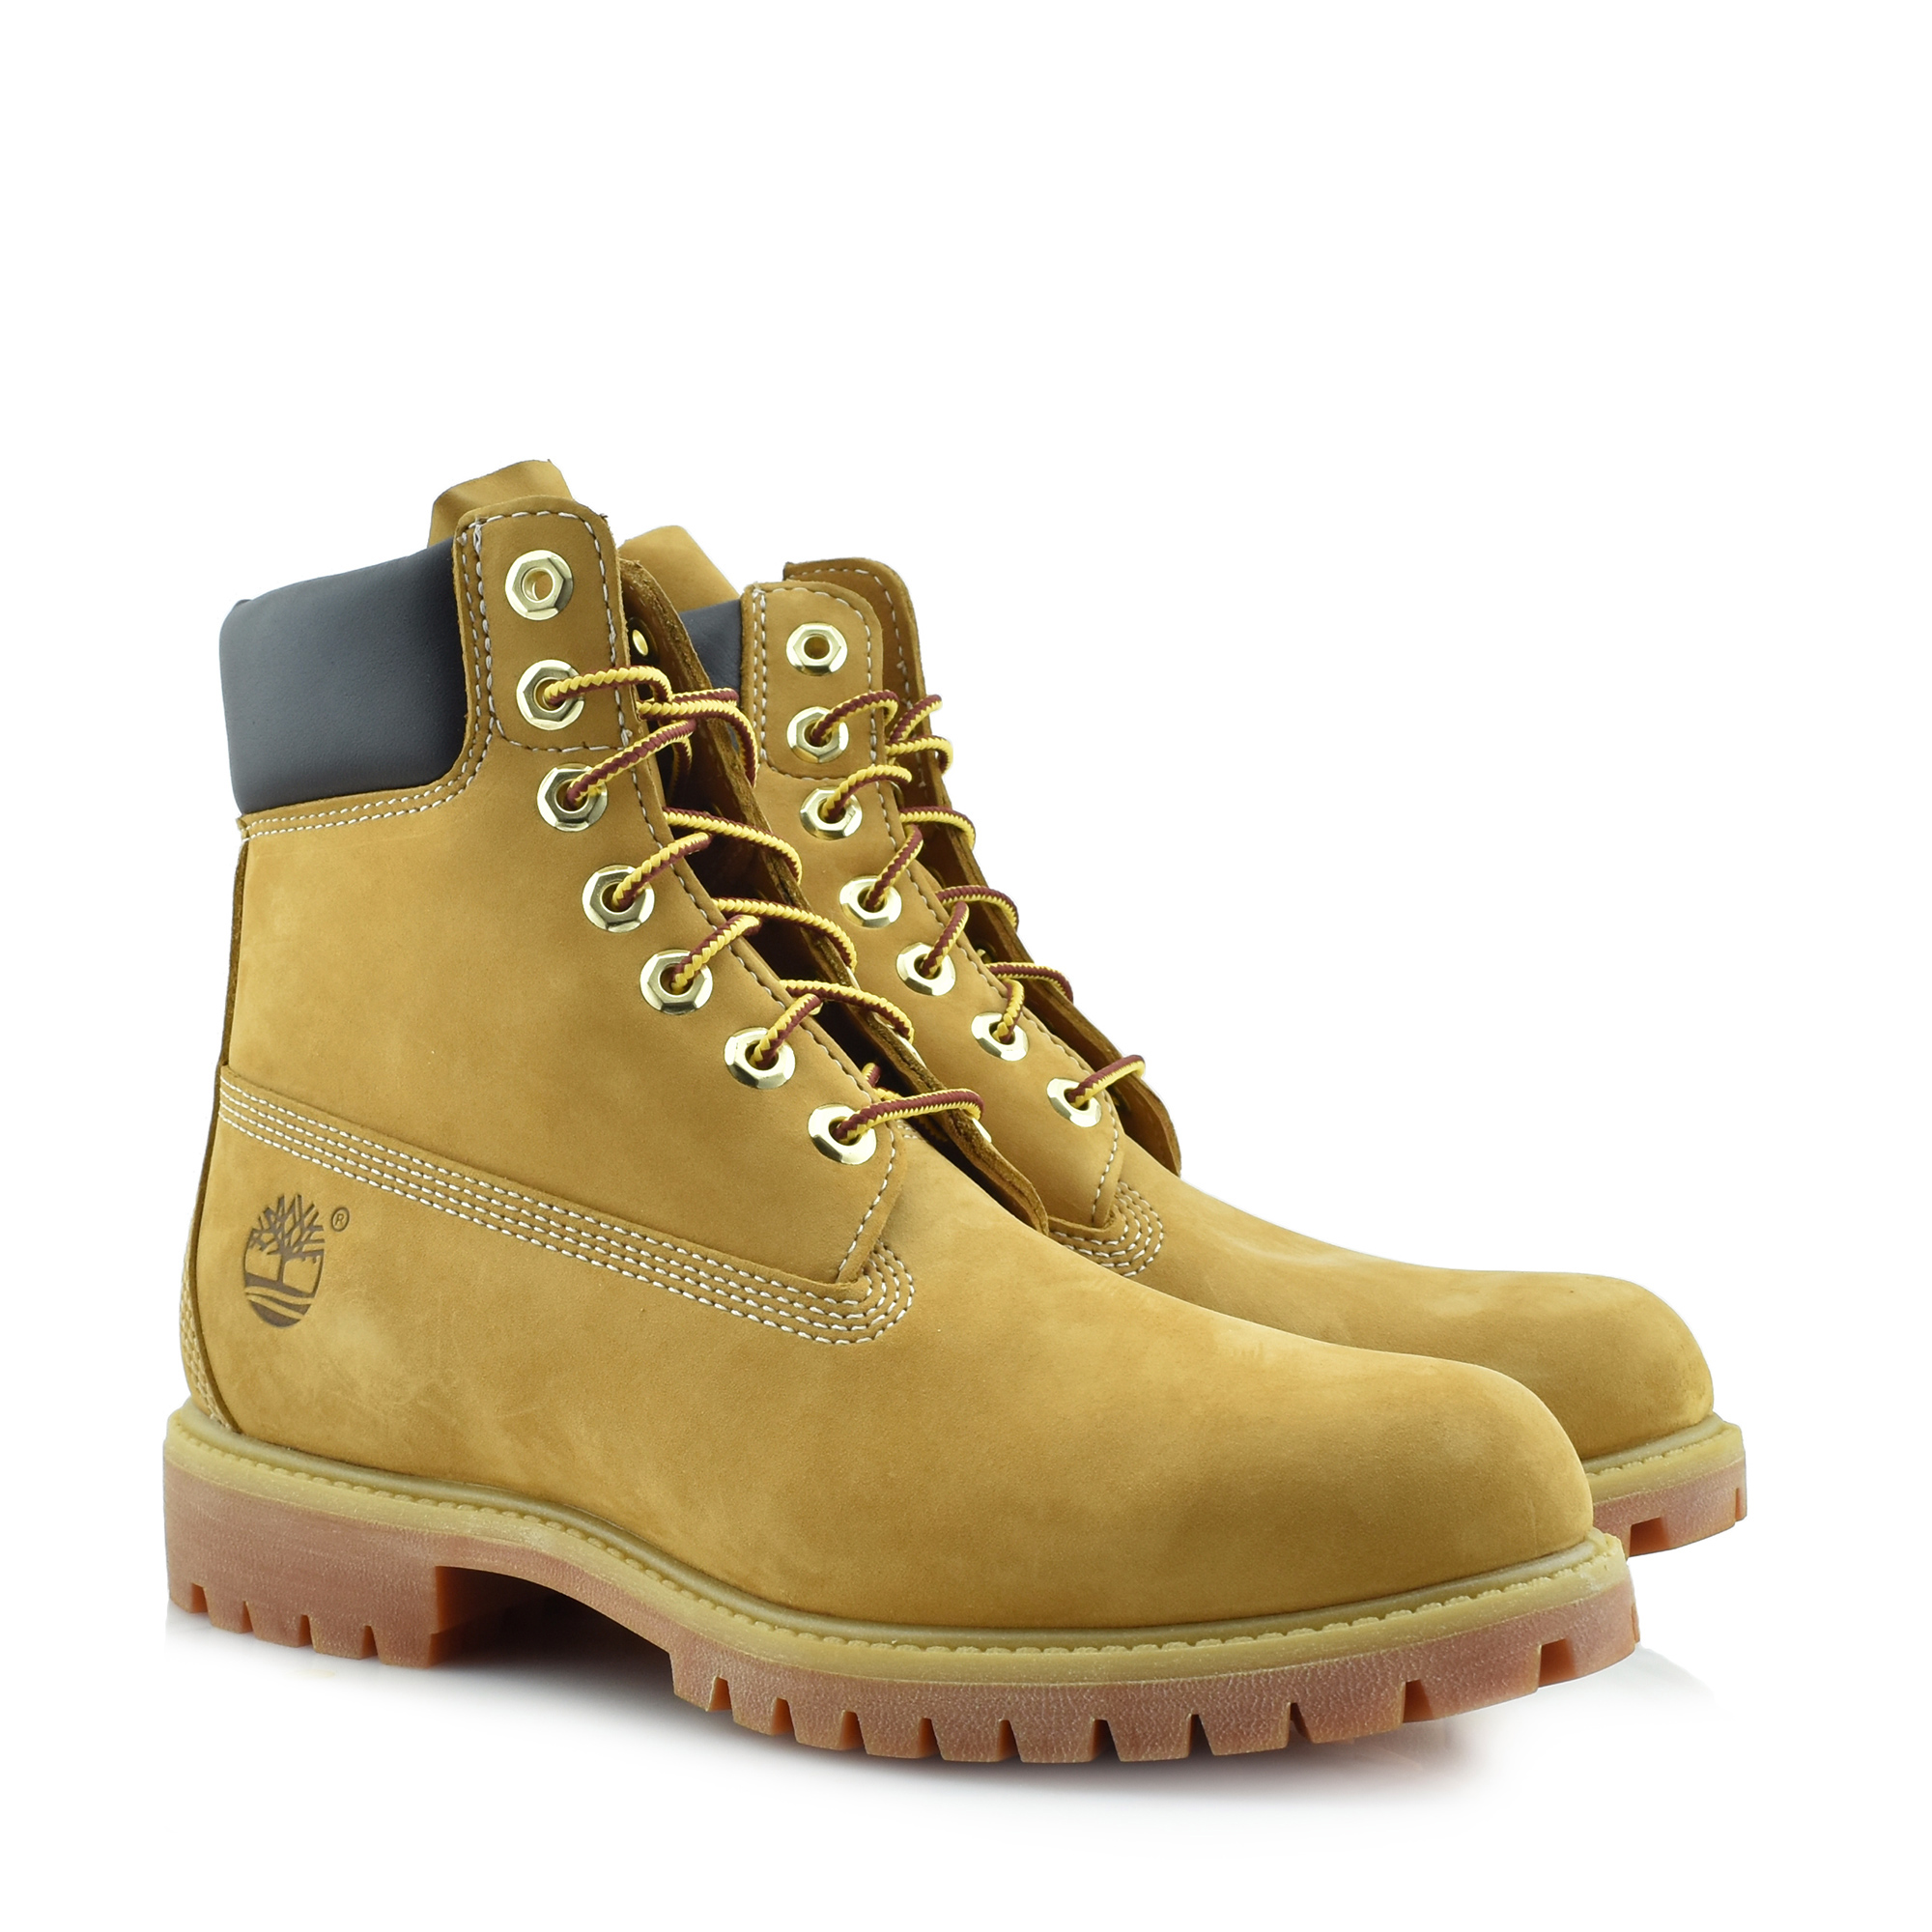 TIMBERLAND 6-INCH PREMIUM WATERPROOF BOOTS - 10061 | DION shop DION Shop